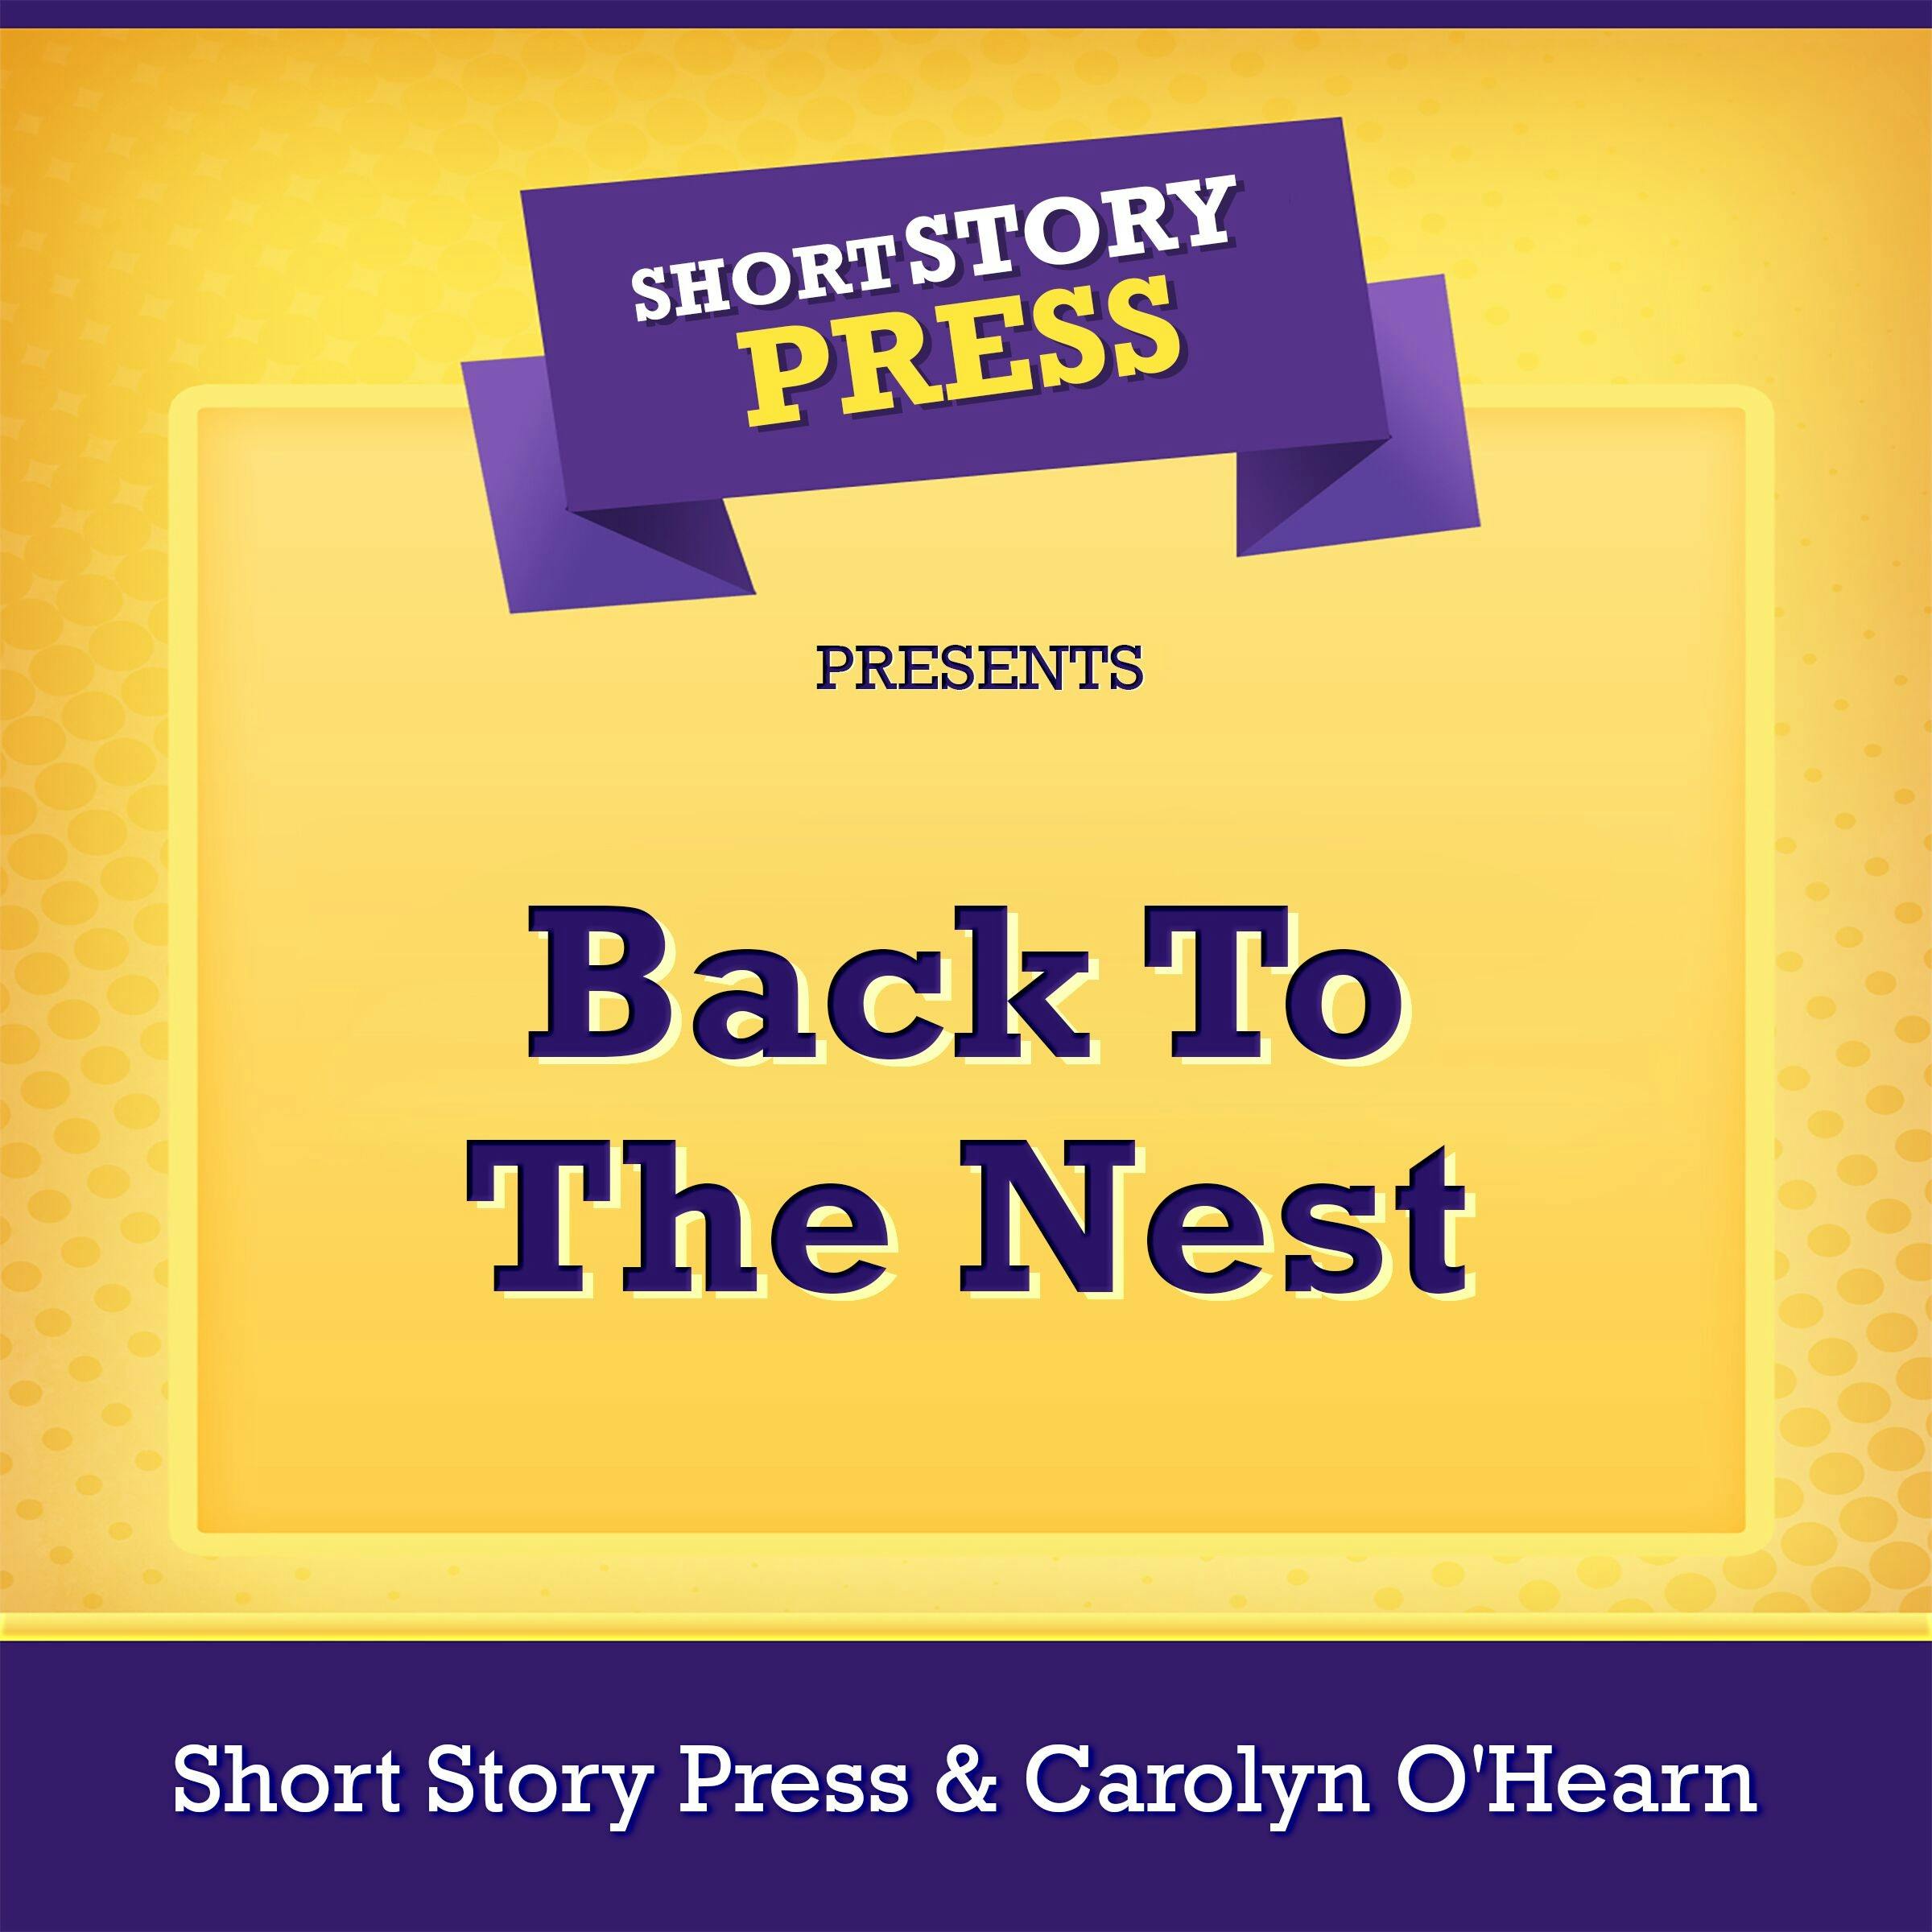 Short Story Press Presents Back To The Nest - undefined